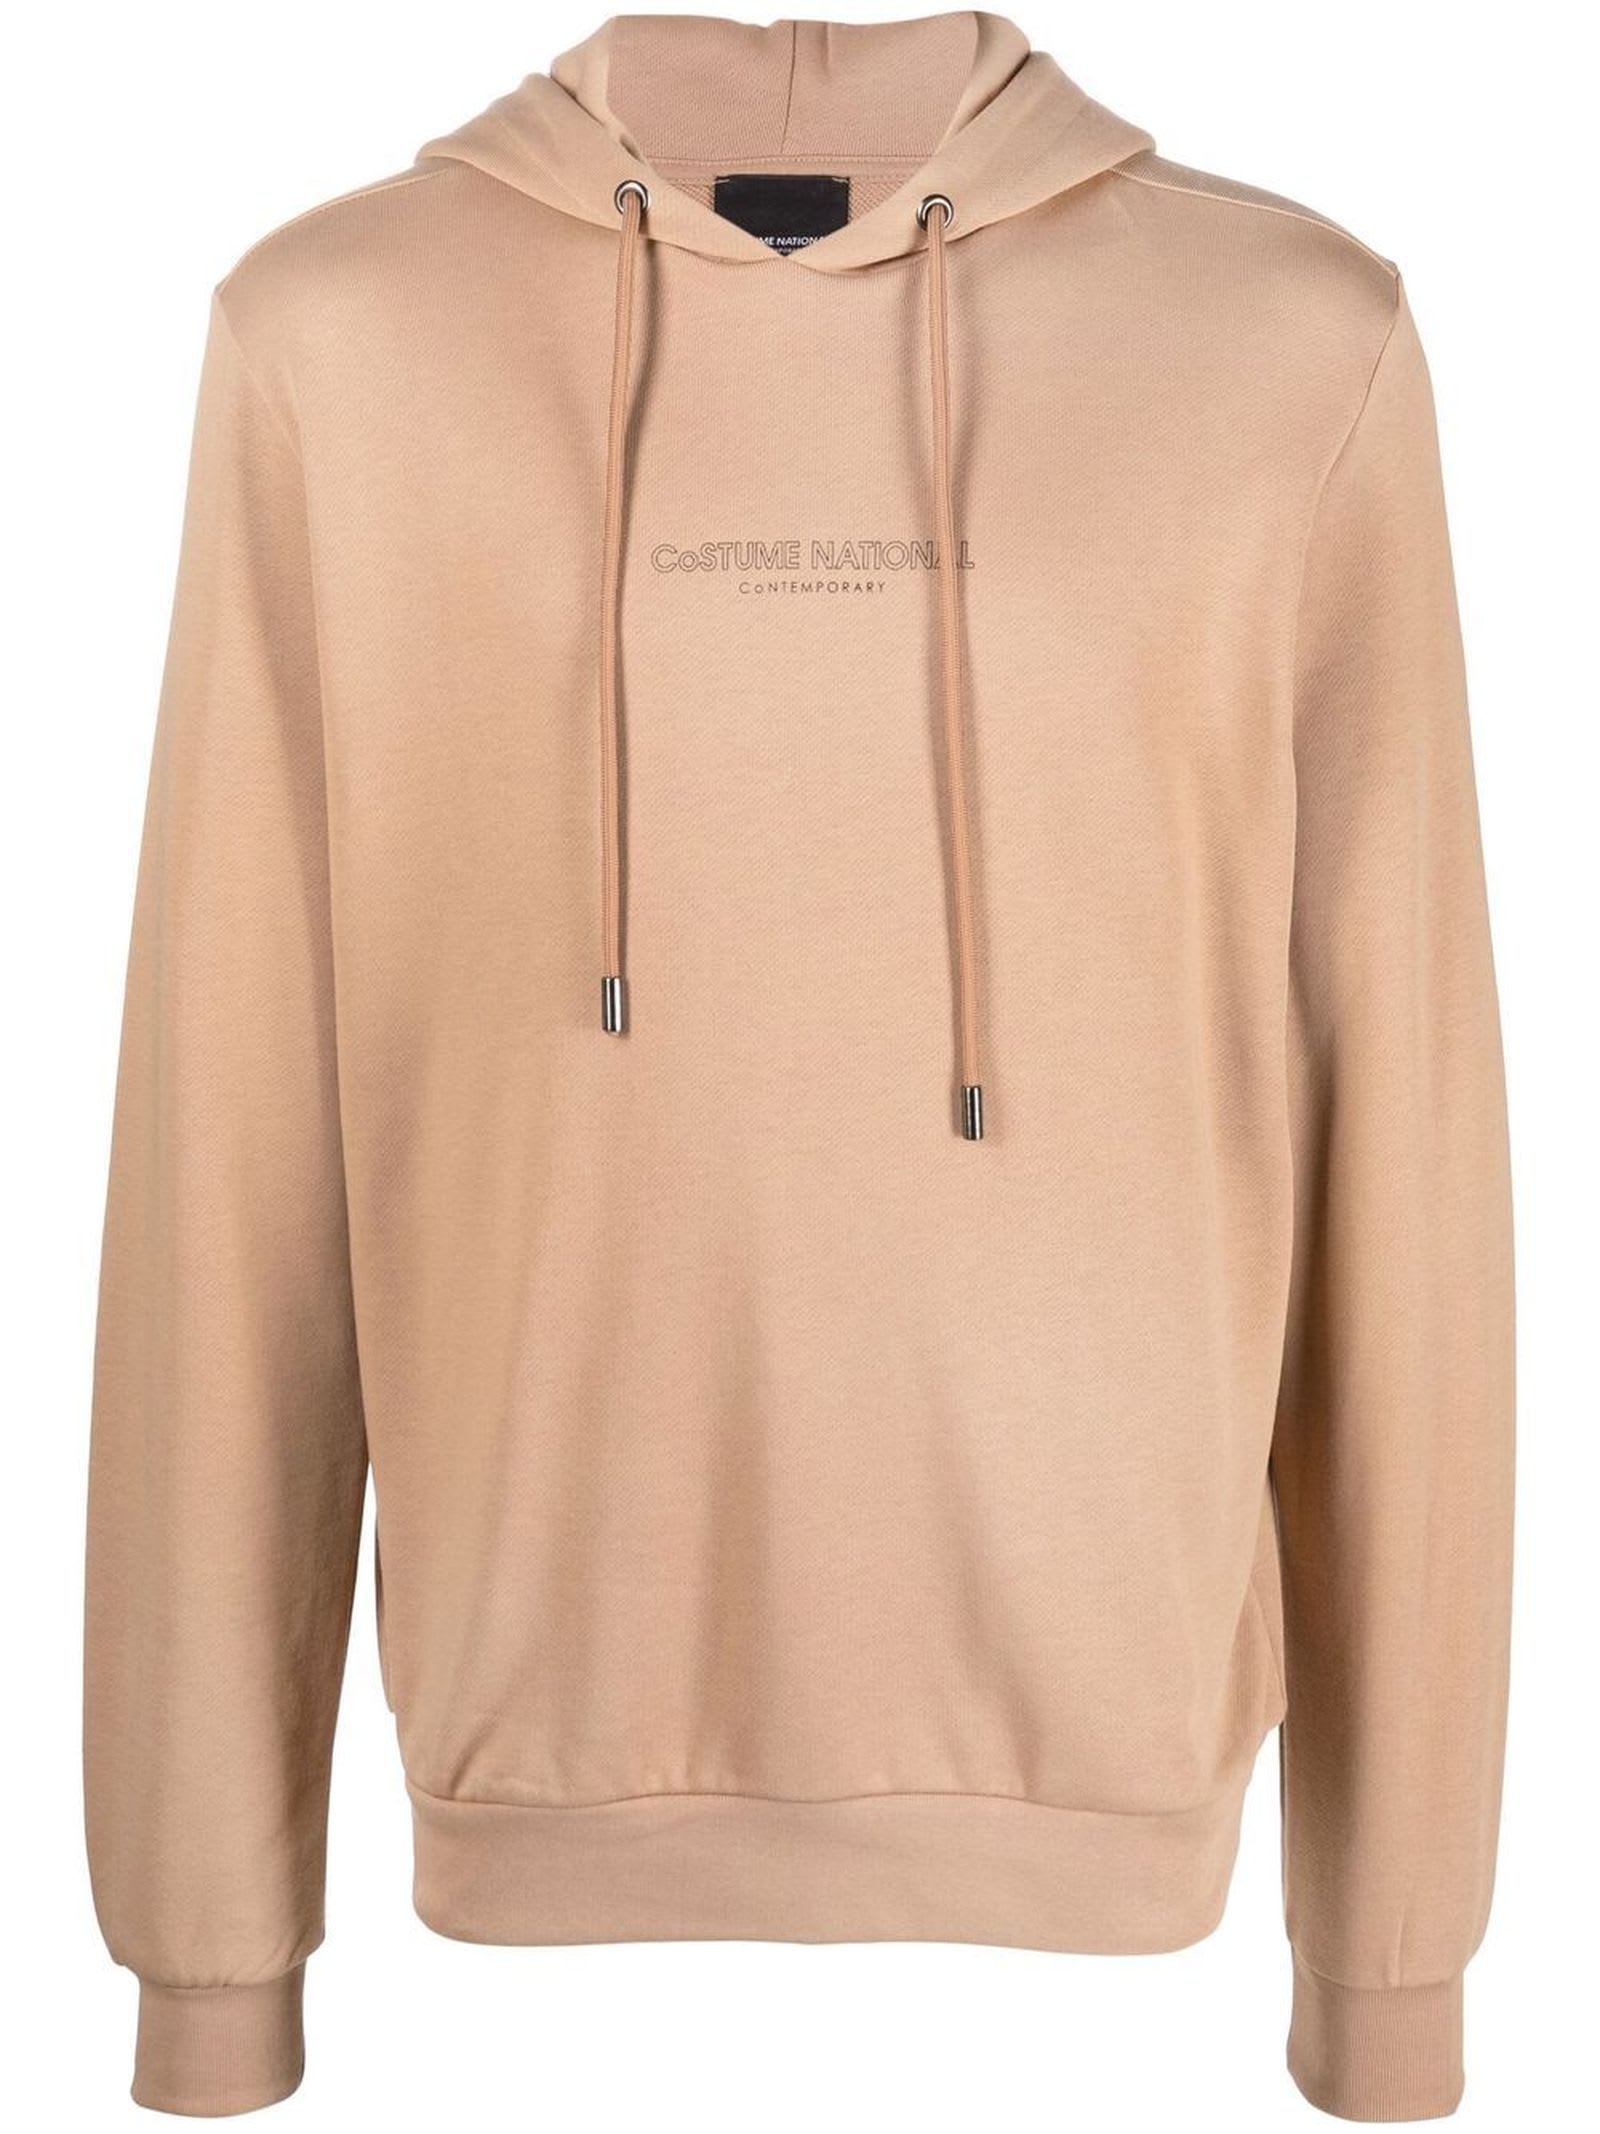 CoSTUME NATIONAL CONTEMPORARY Beige Cotton Hoodie